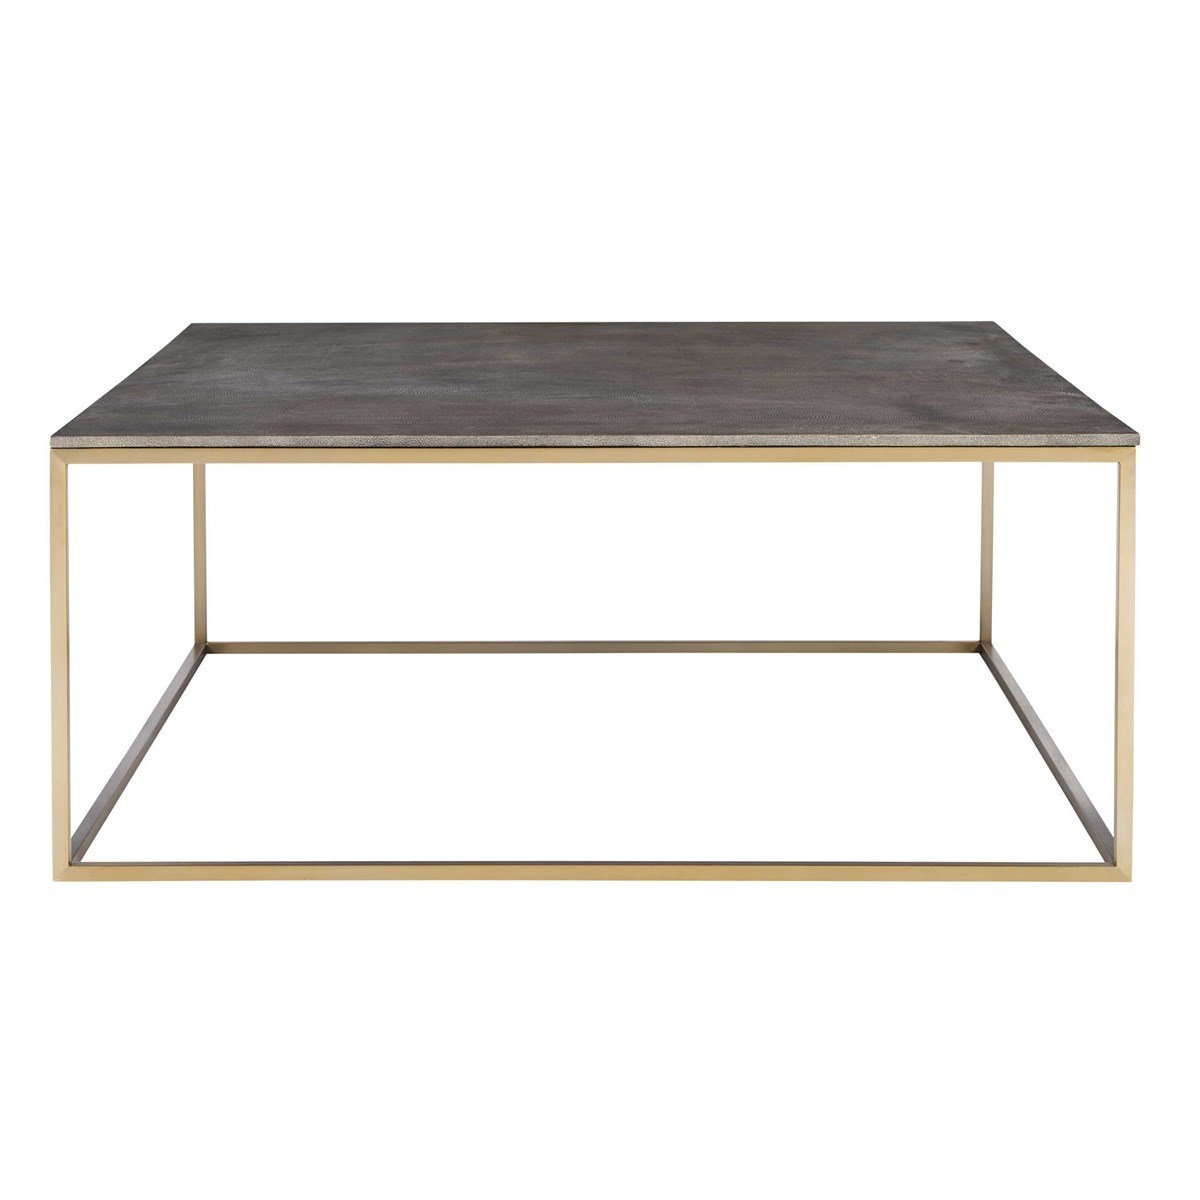 Hudsonhill Foundry Trebon 38"W Charcoal Gray and Brass Coffee Table - Style # 78D48 - Image 0